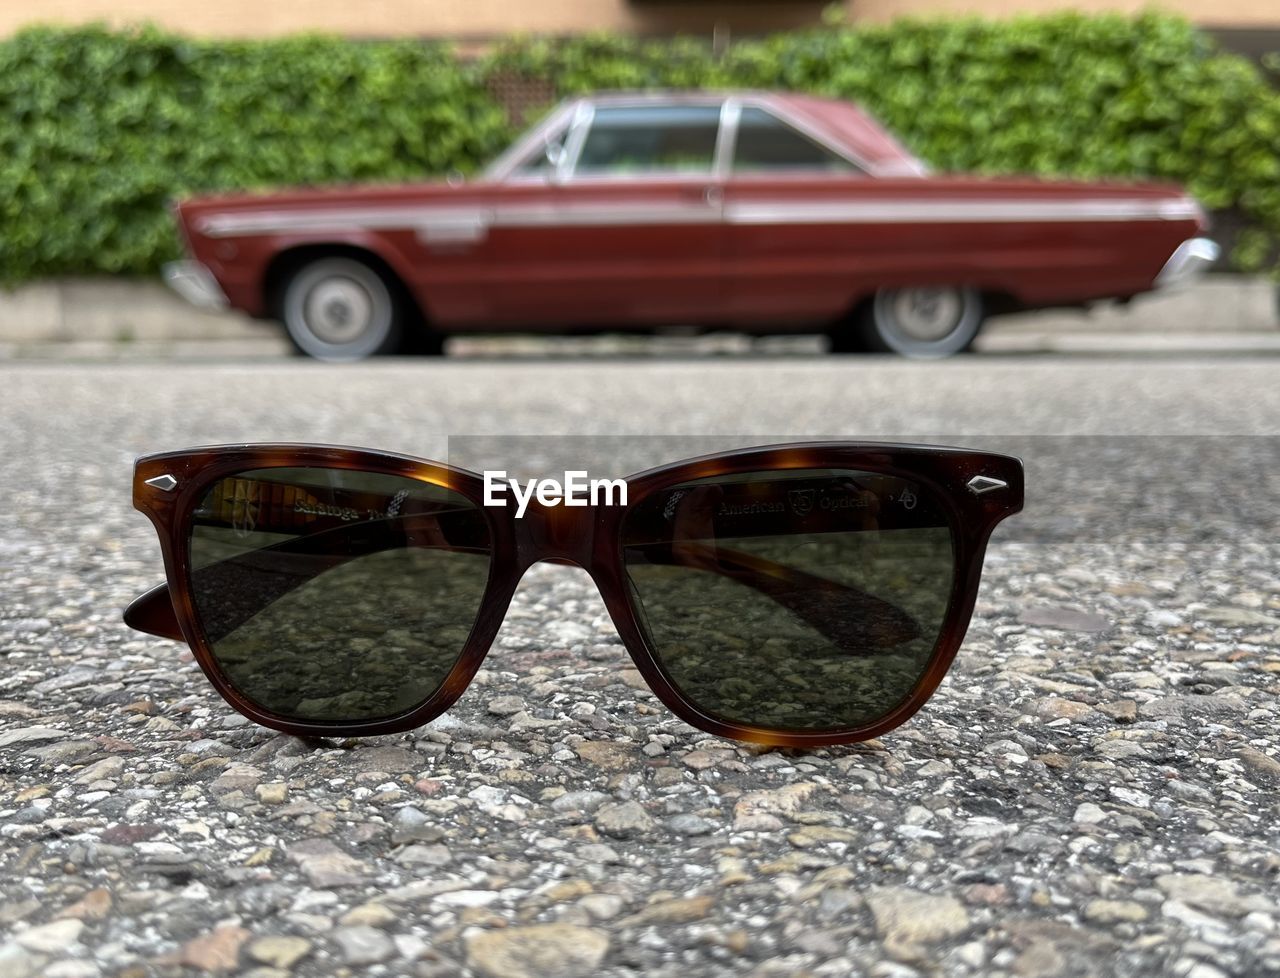 glasses, fashion, sunglasses, eyewear, car, vision care, day, transportation, city, motor vehicle, outdoors, mode of transportation, no people, close-up, reflection, focus on foreground, nature, fashion accessory